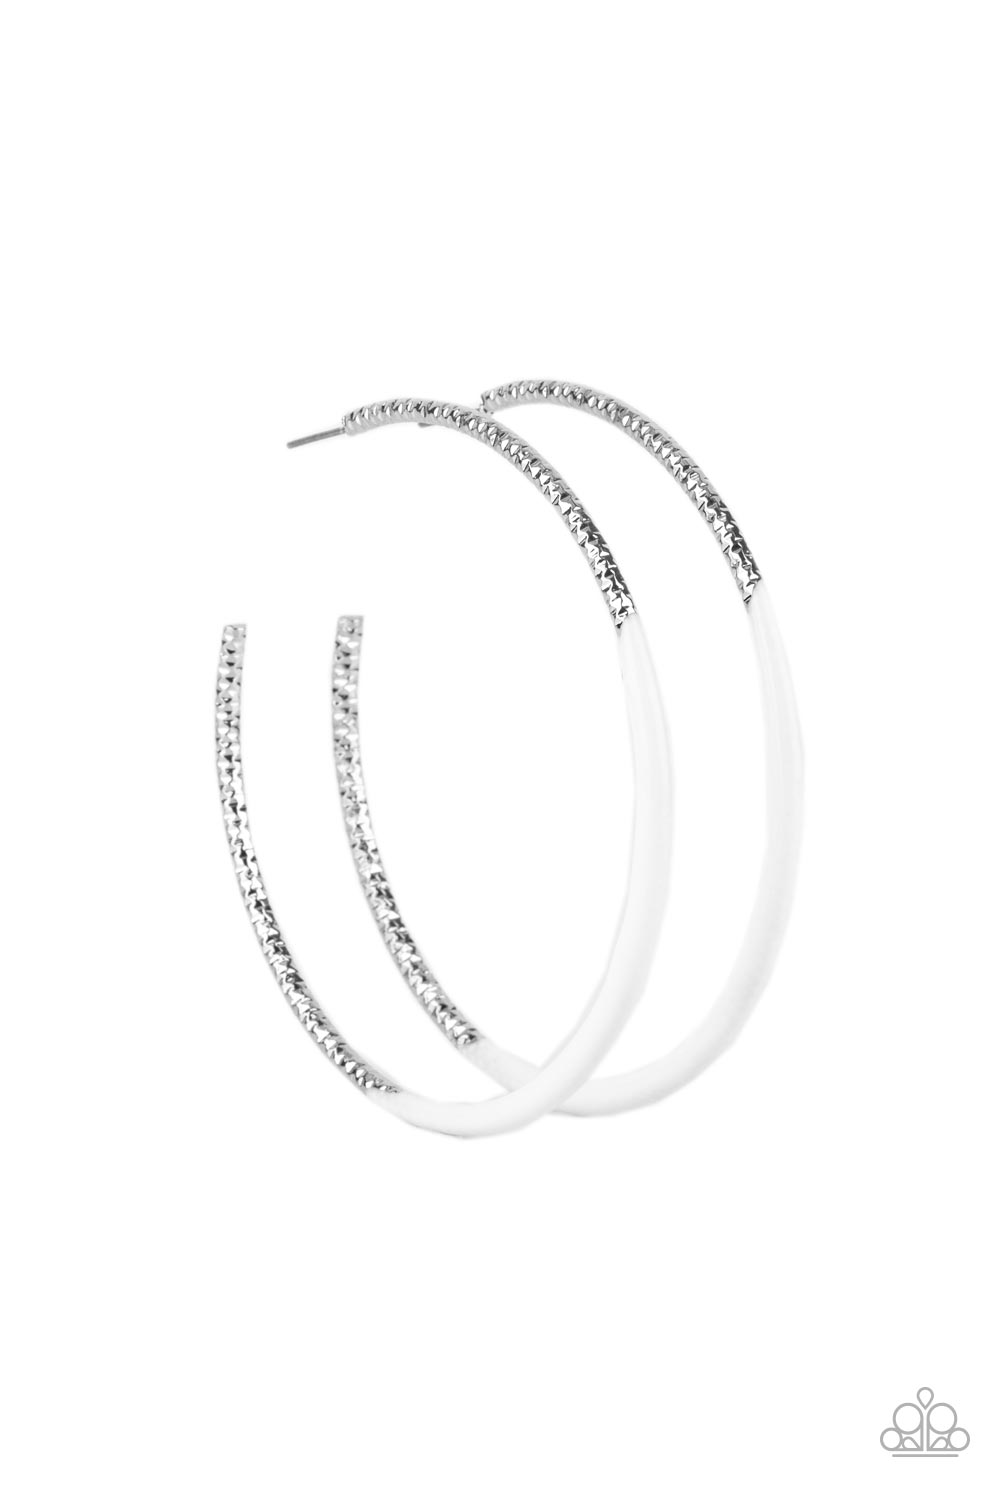 DIP, DIP, Hooray! White Hoop Earring - Paparazzi Accessories  Featuring faceted diamond cut texture, a shimmery silver hoop is dipped in white paint for a colorful flair. Earring attaches to a standard post fitting. Hoop measures approximately 2 3/4" in diameter.  All Paparazzi Accessories are lead free and nickel free!  Sold as one pair of hoop earrings.